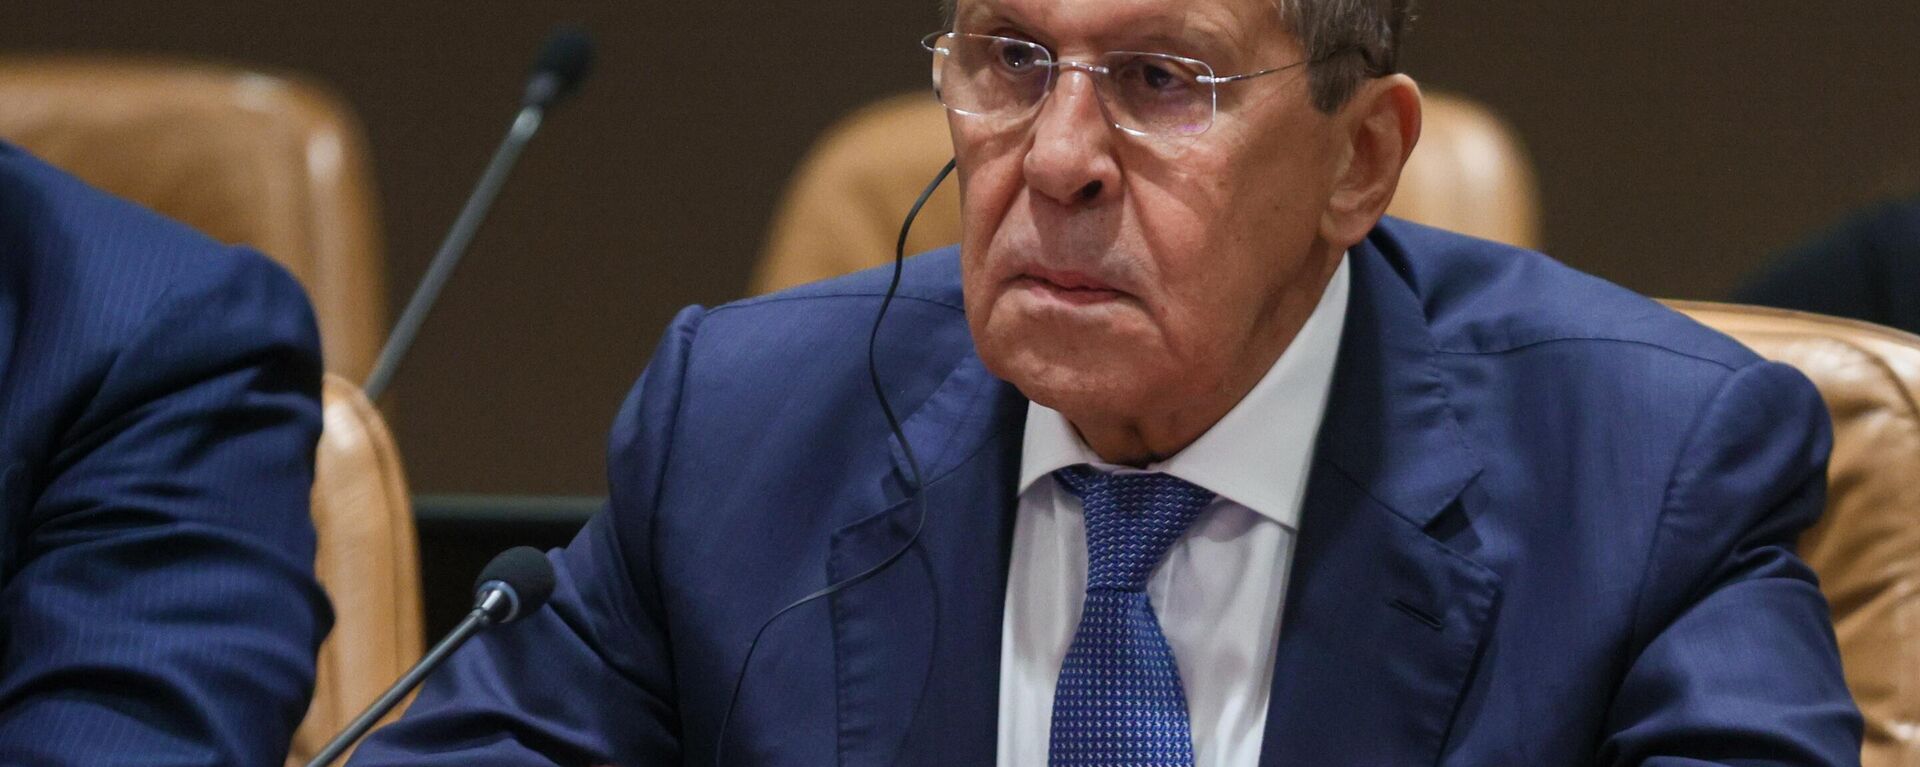 Russian Foreign Minister Sergei Lavrov during a meeting with his Chinese counterpart during the 77th session of the United Nations General Assembly in New York. - Sputnik International, 1920, 15.11.2022